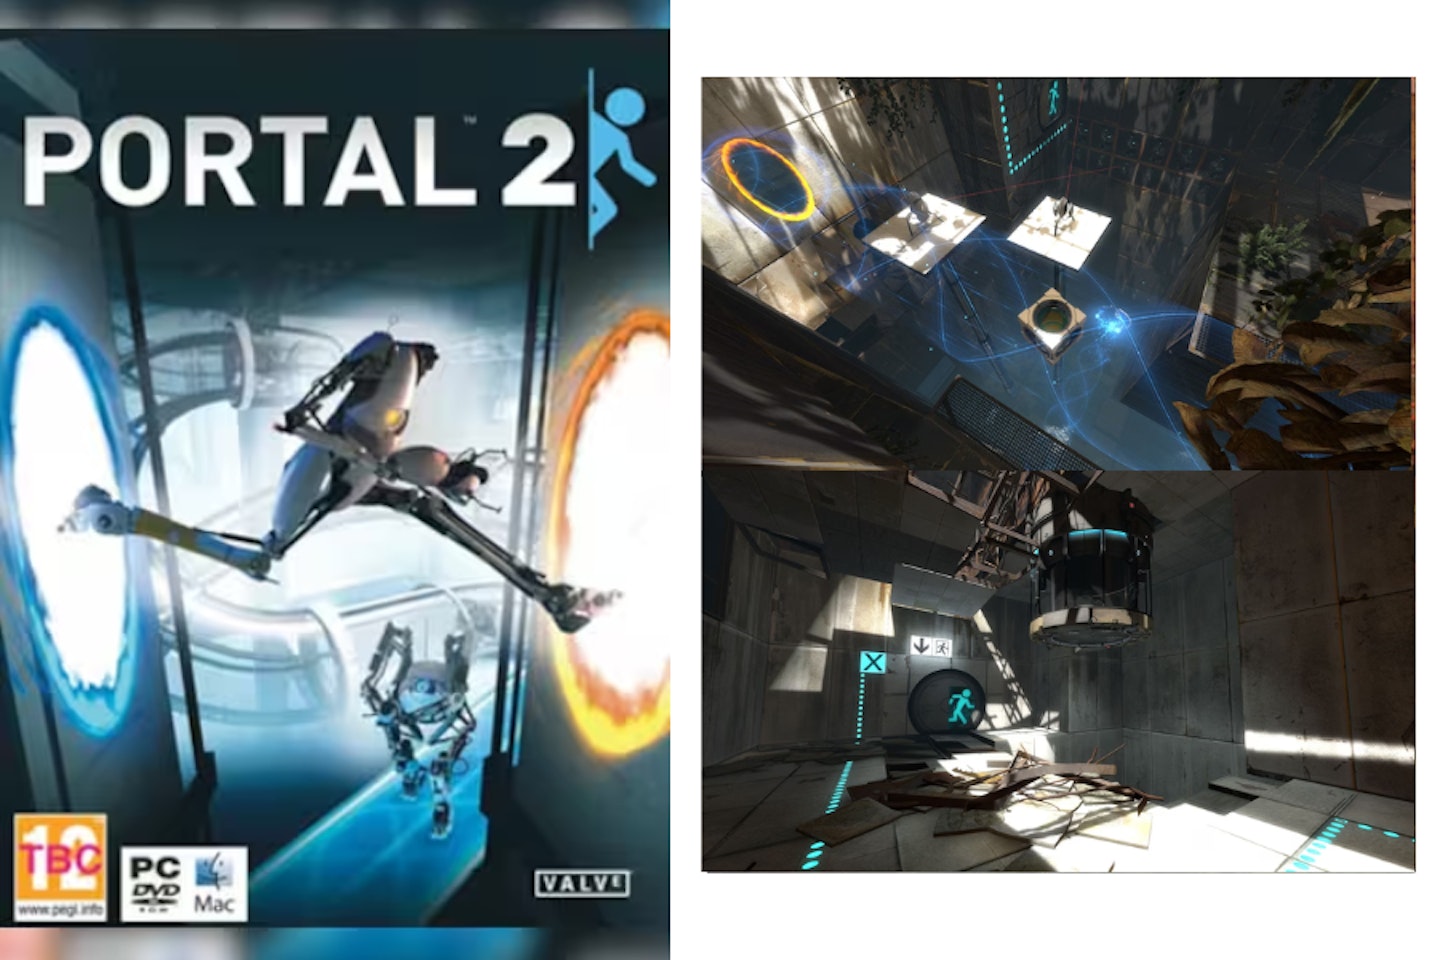 Portal 2 - one of the best co-op games on PC